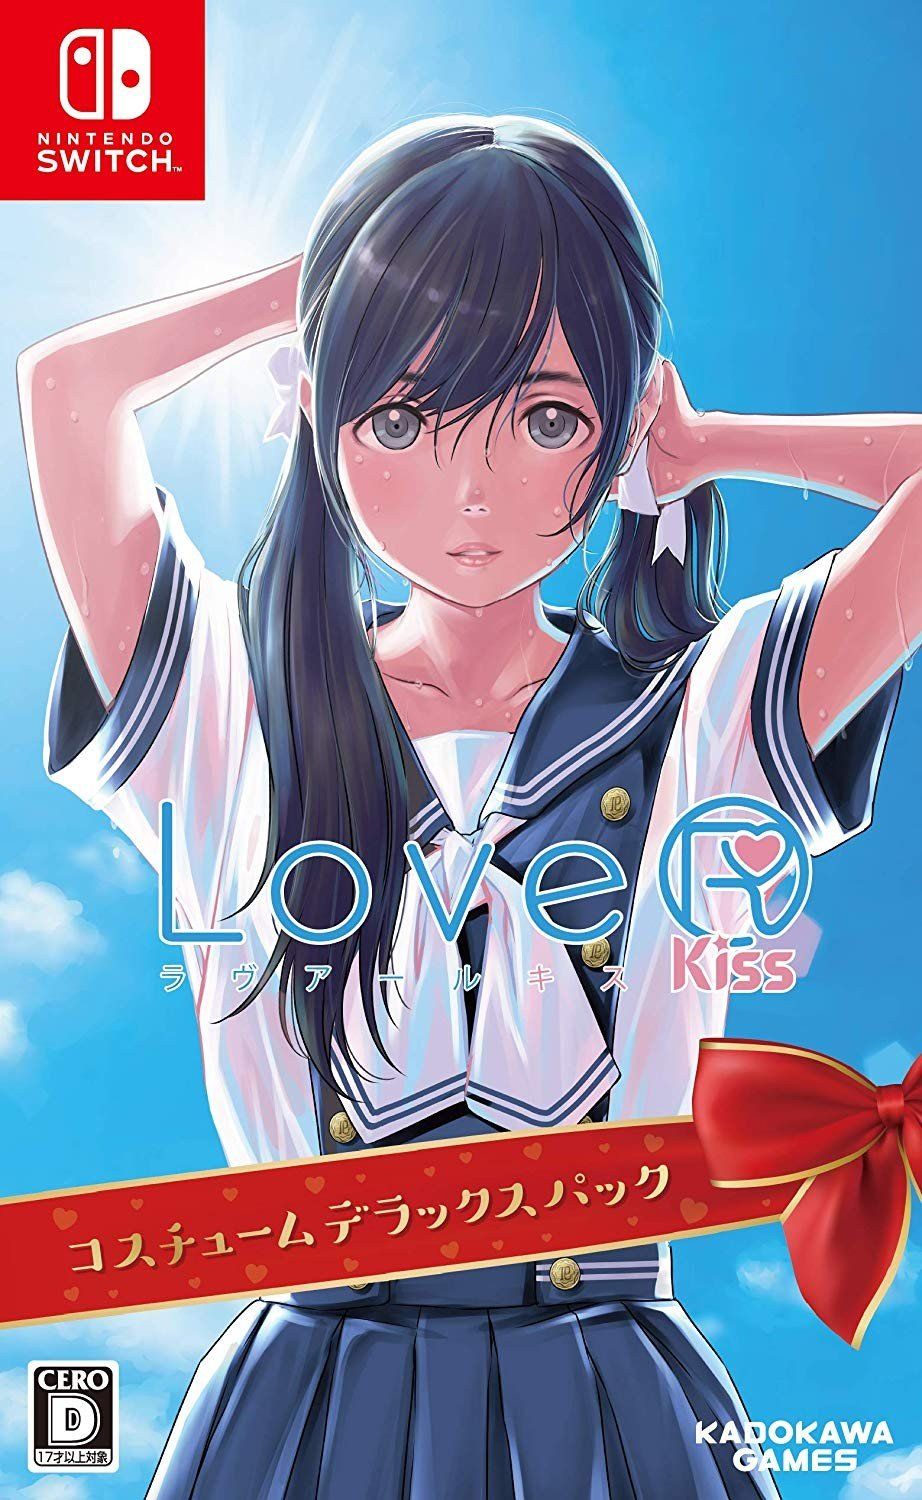 annoncere Forbindelse Ruckus J-LIST on Twitter: "Oh nice, there's an awesome LoveR Kiss Costume Deluxe  Pack dating-sim game for Nintendo Switch. Do you want to order a copy?  https://t.co/spSWOoaDou https://t.co/2R1NwaBlcO" / Twitter